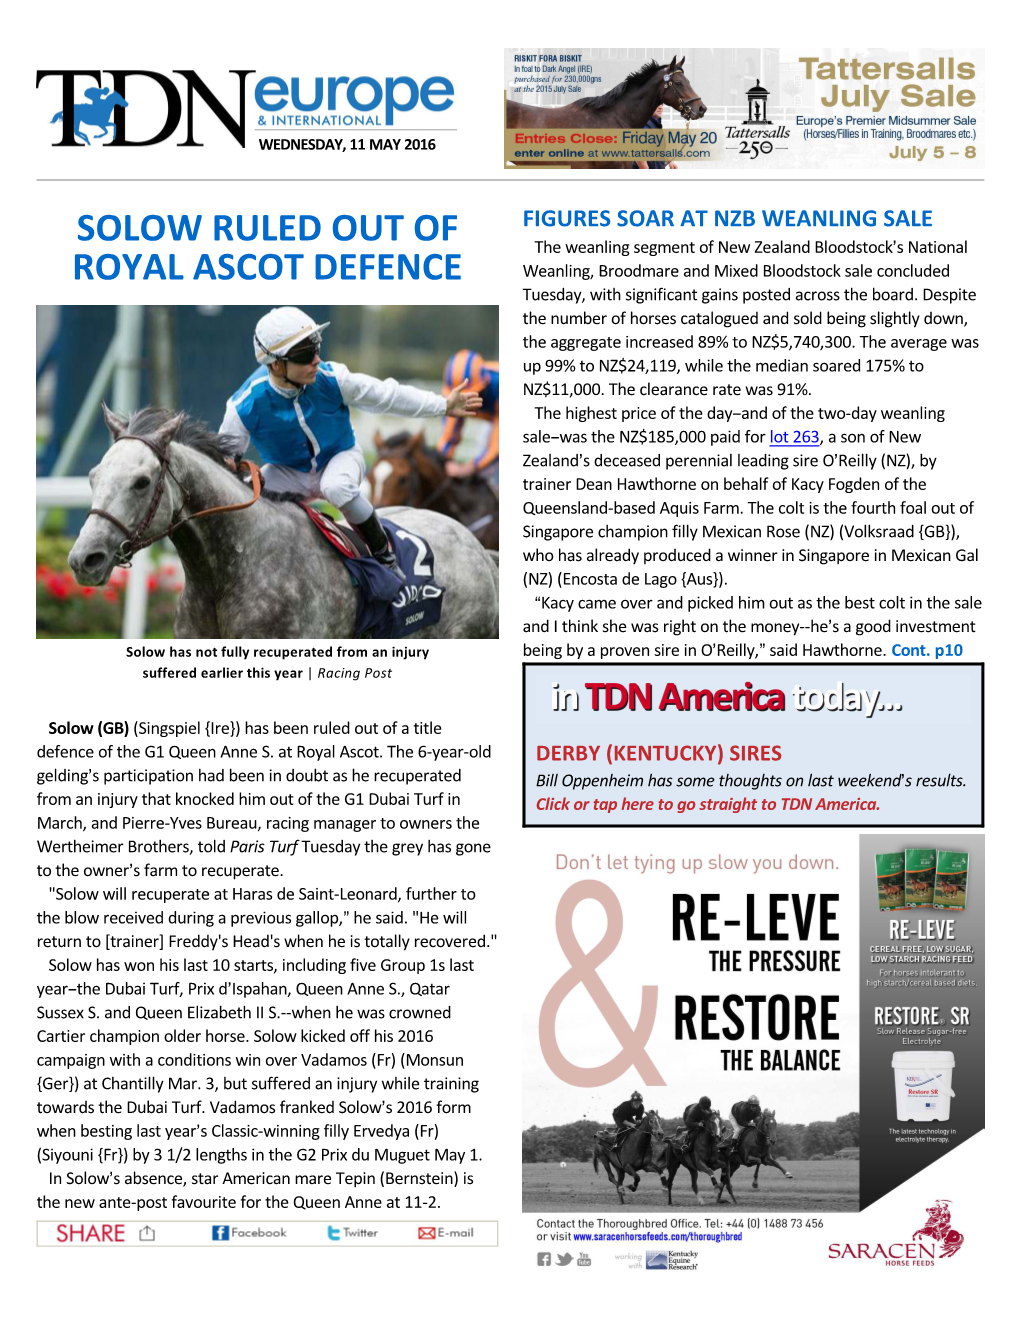 Solow Ruled out of Royal Ascot Defence